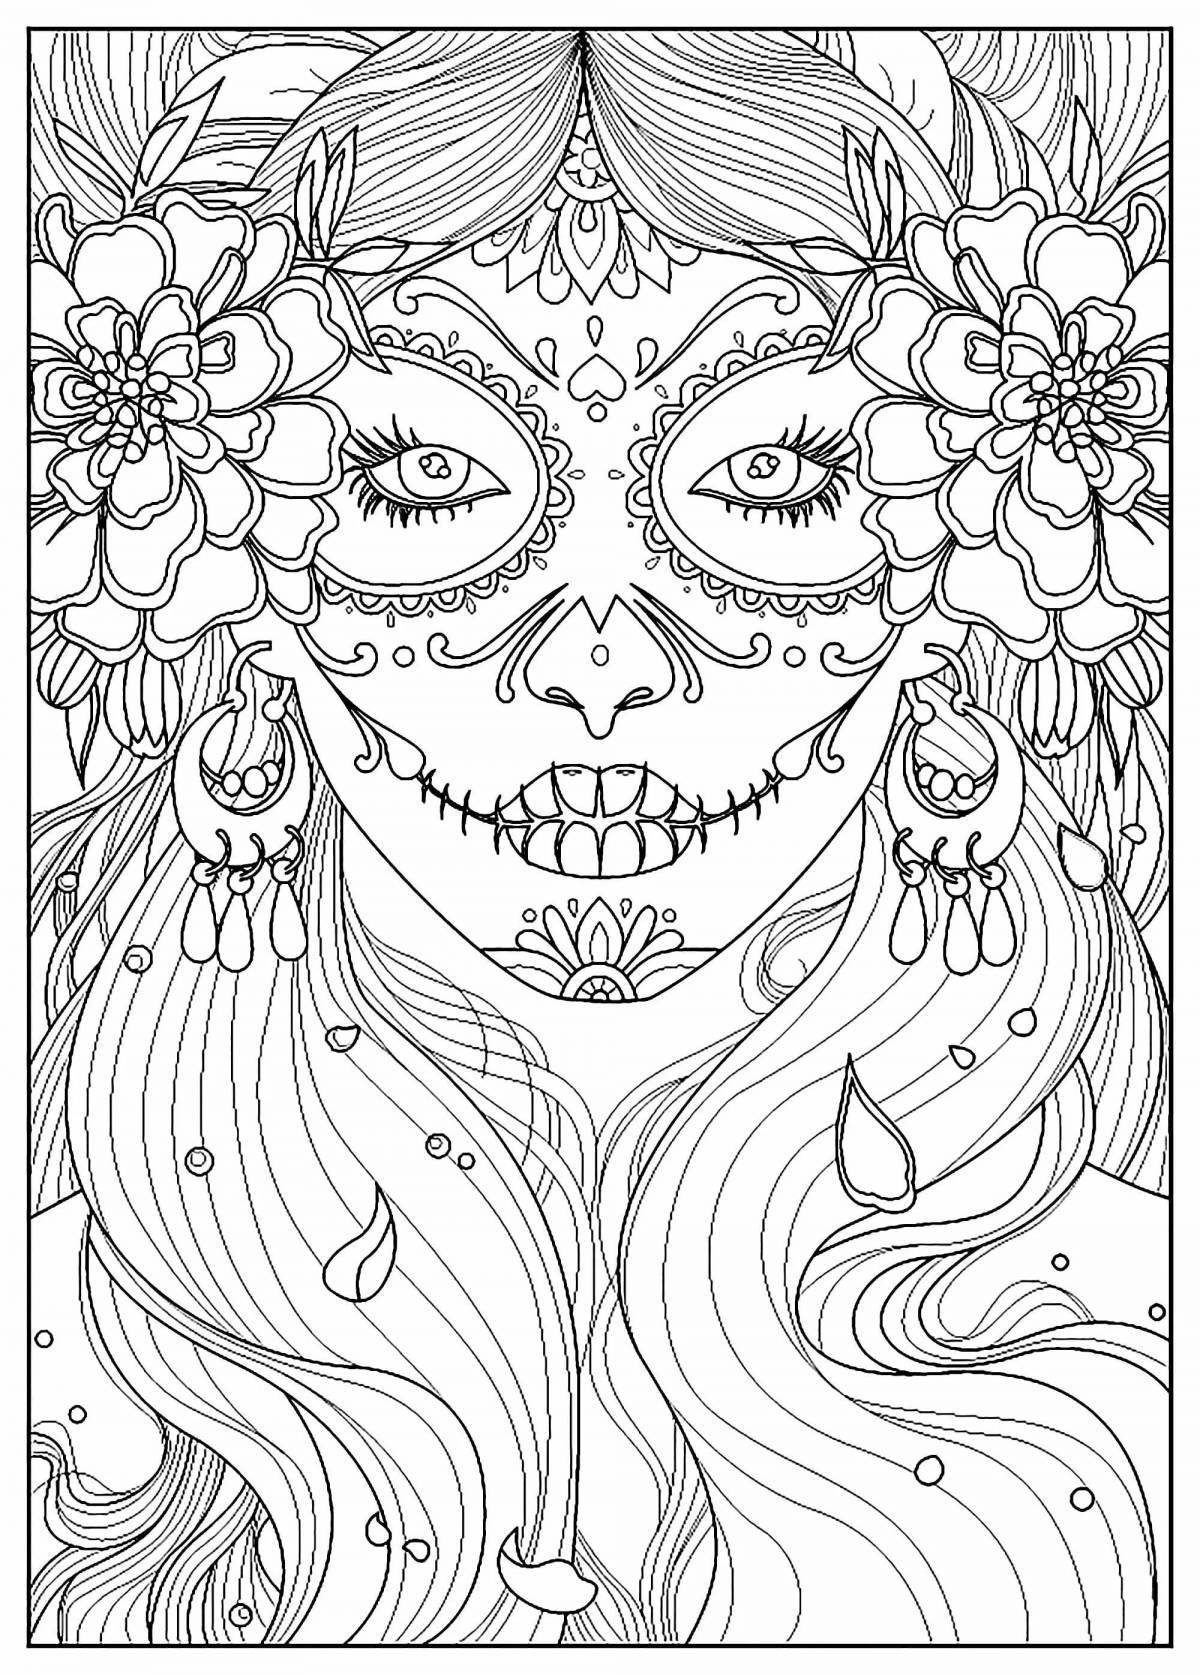 Touching psychological coloring book for adults